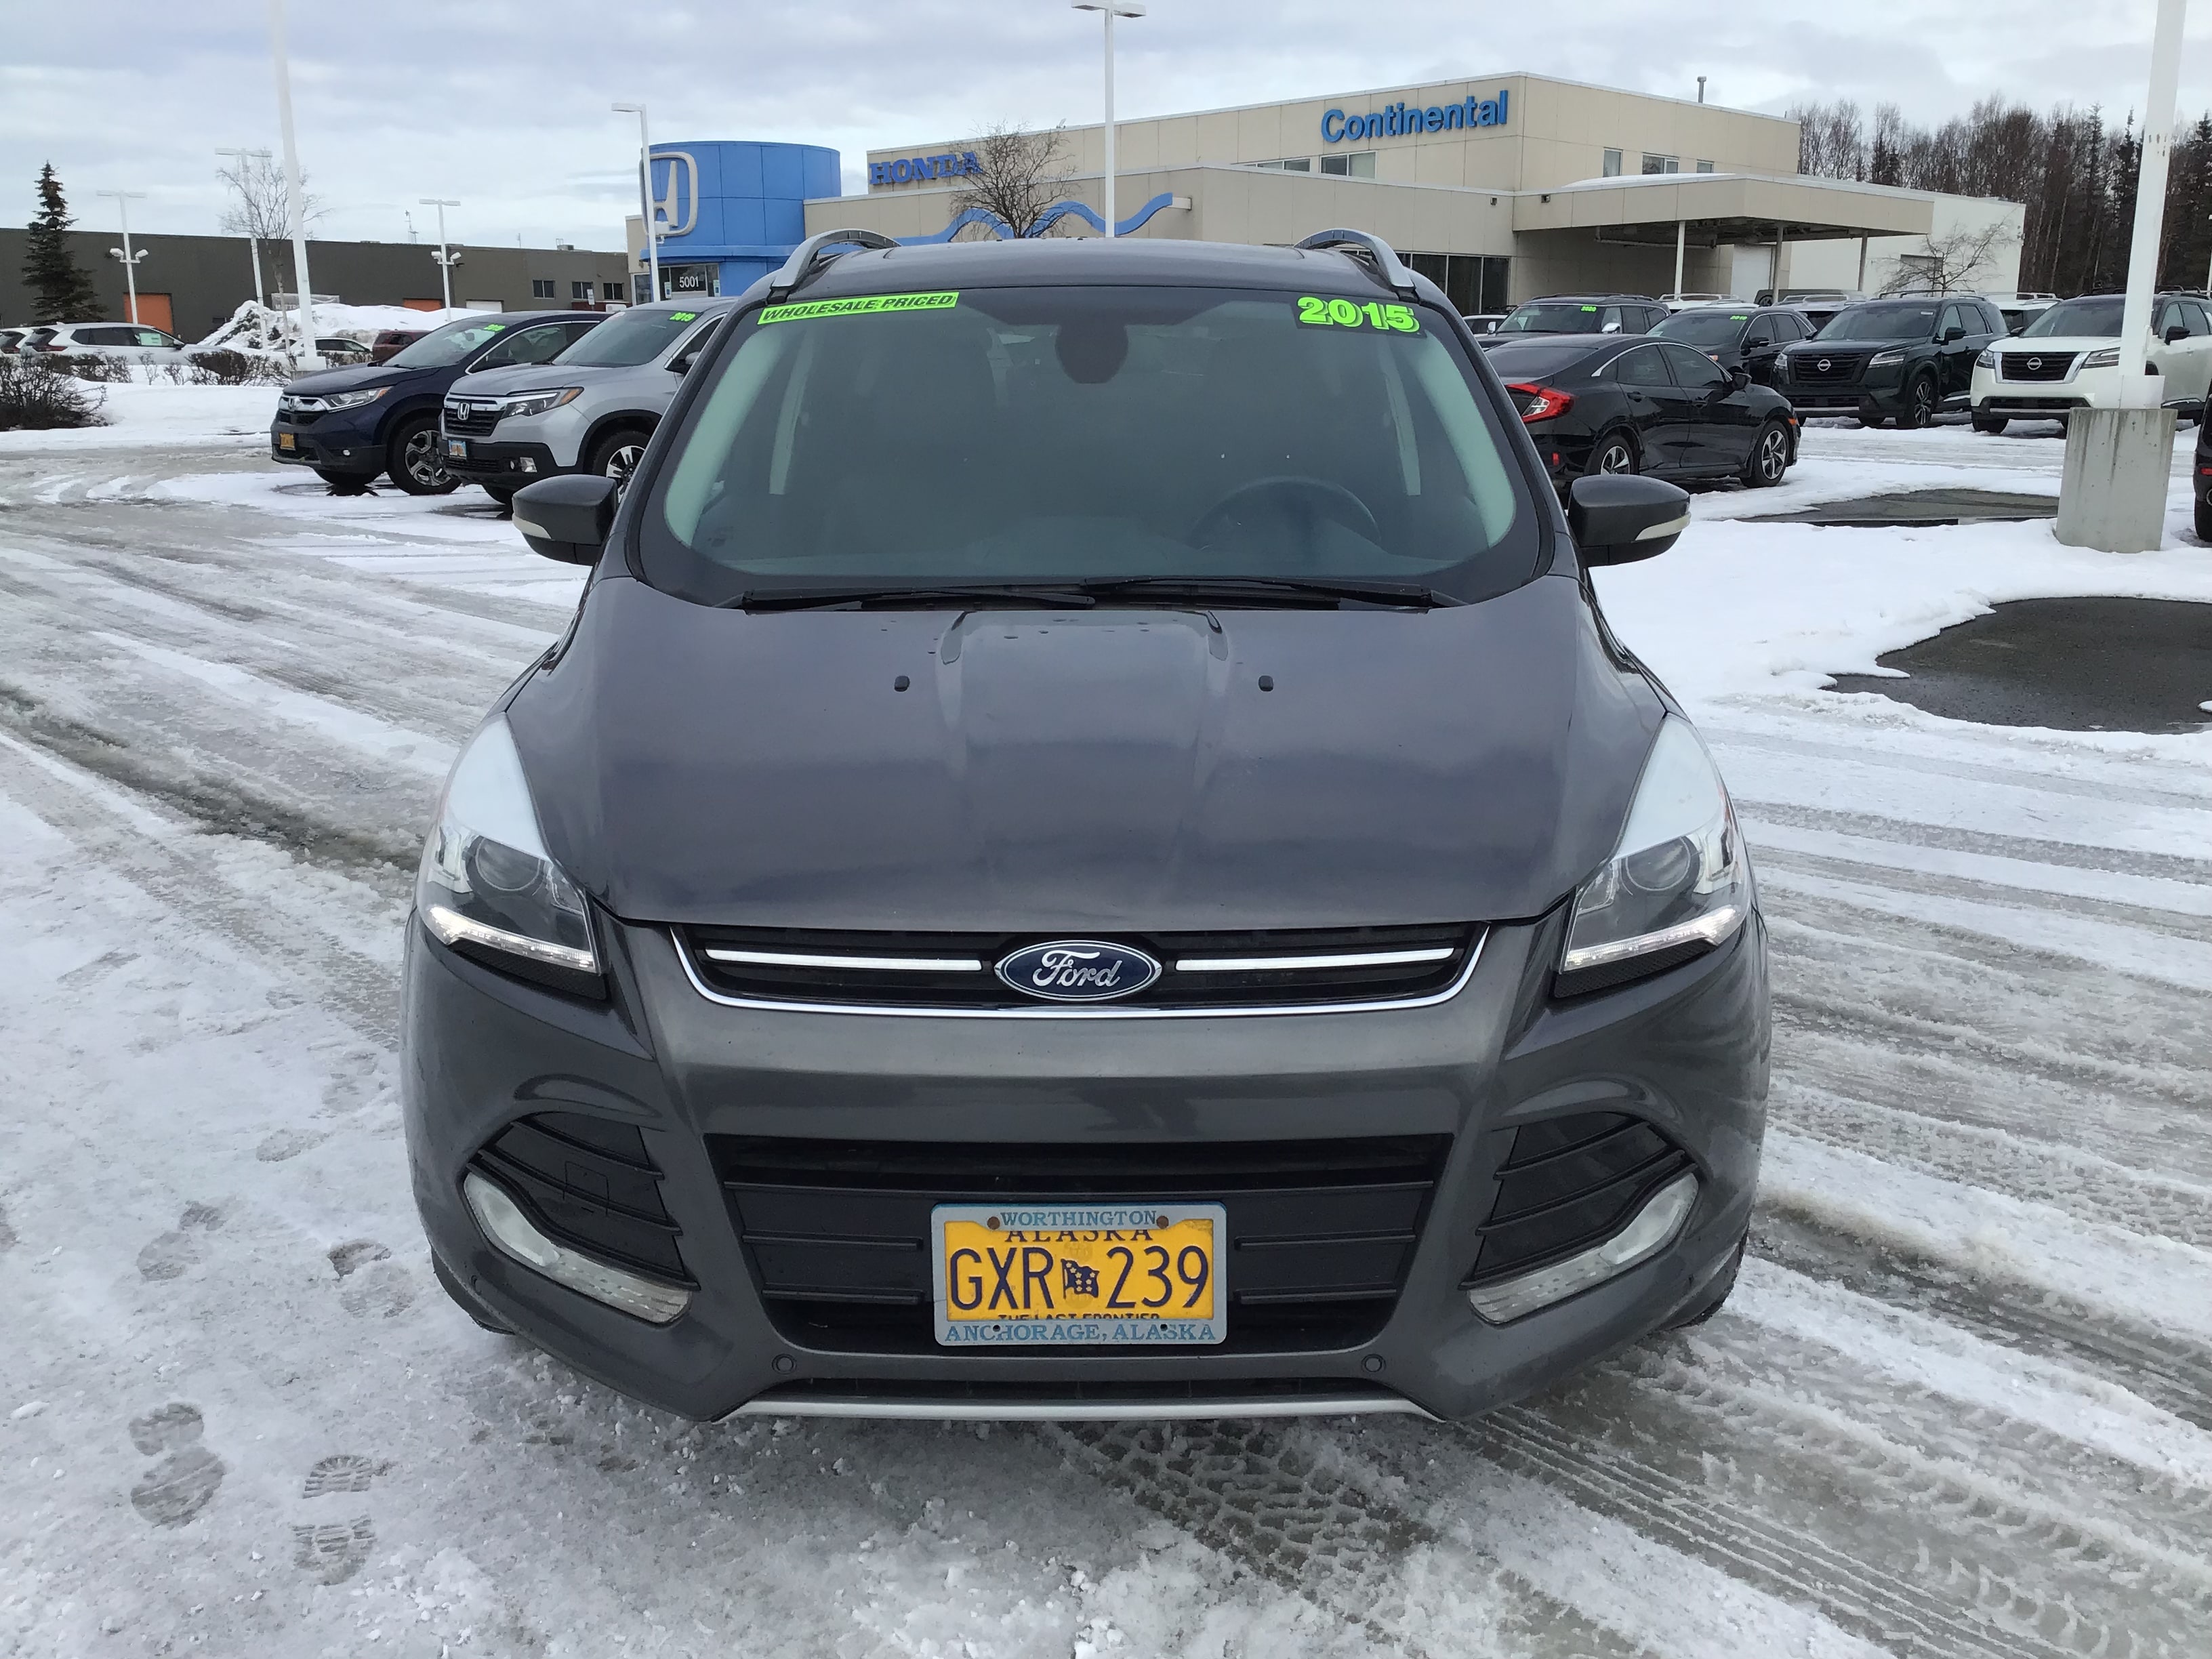 Used 2015 Ford Escape Titanium with VIN 1FMCU9JX7FUA31695 for sale in Anchorage, AK